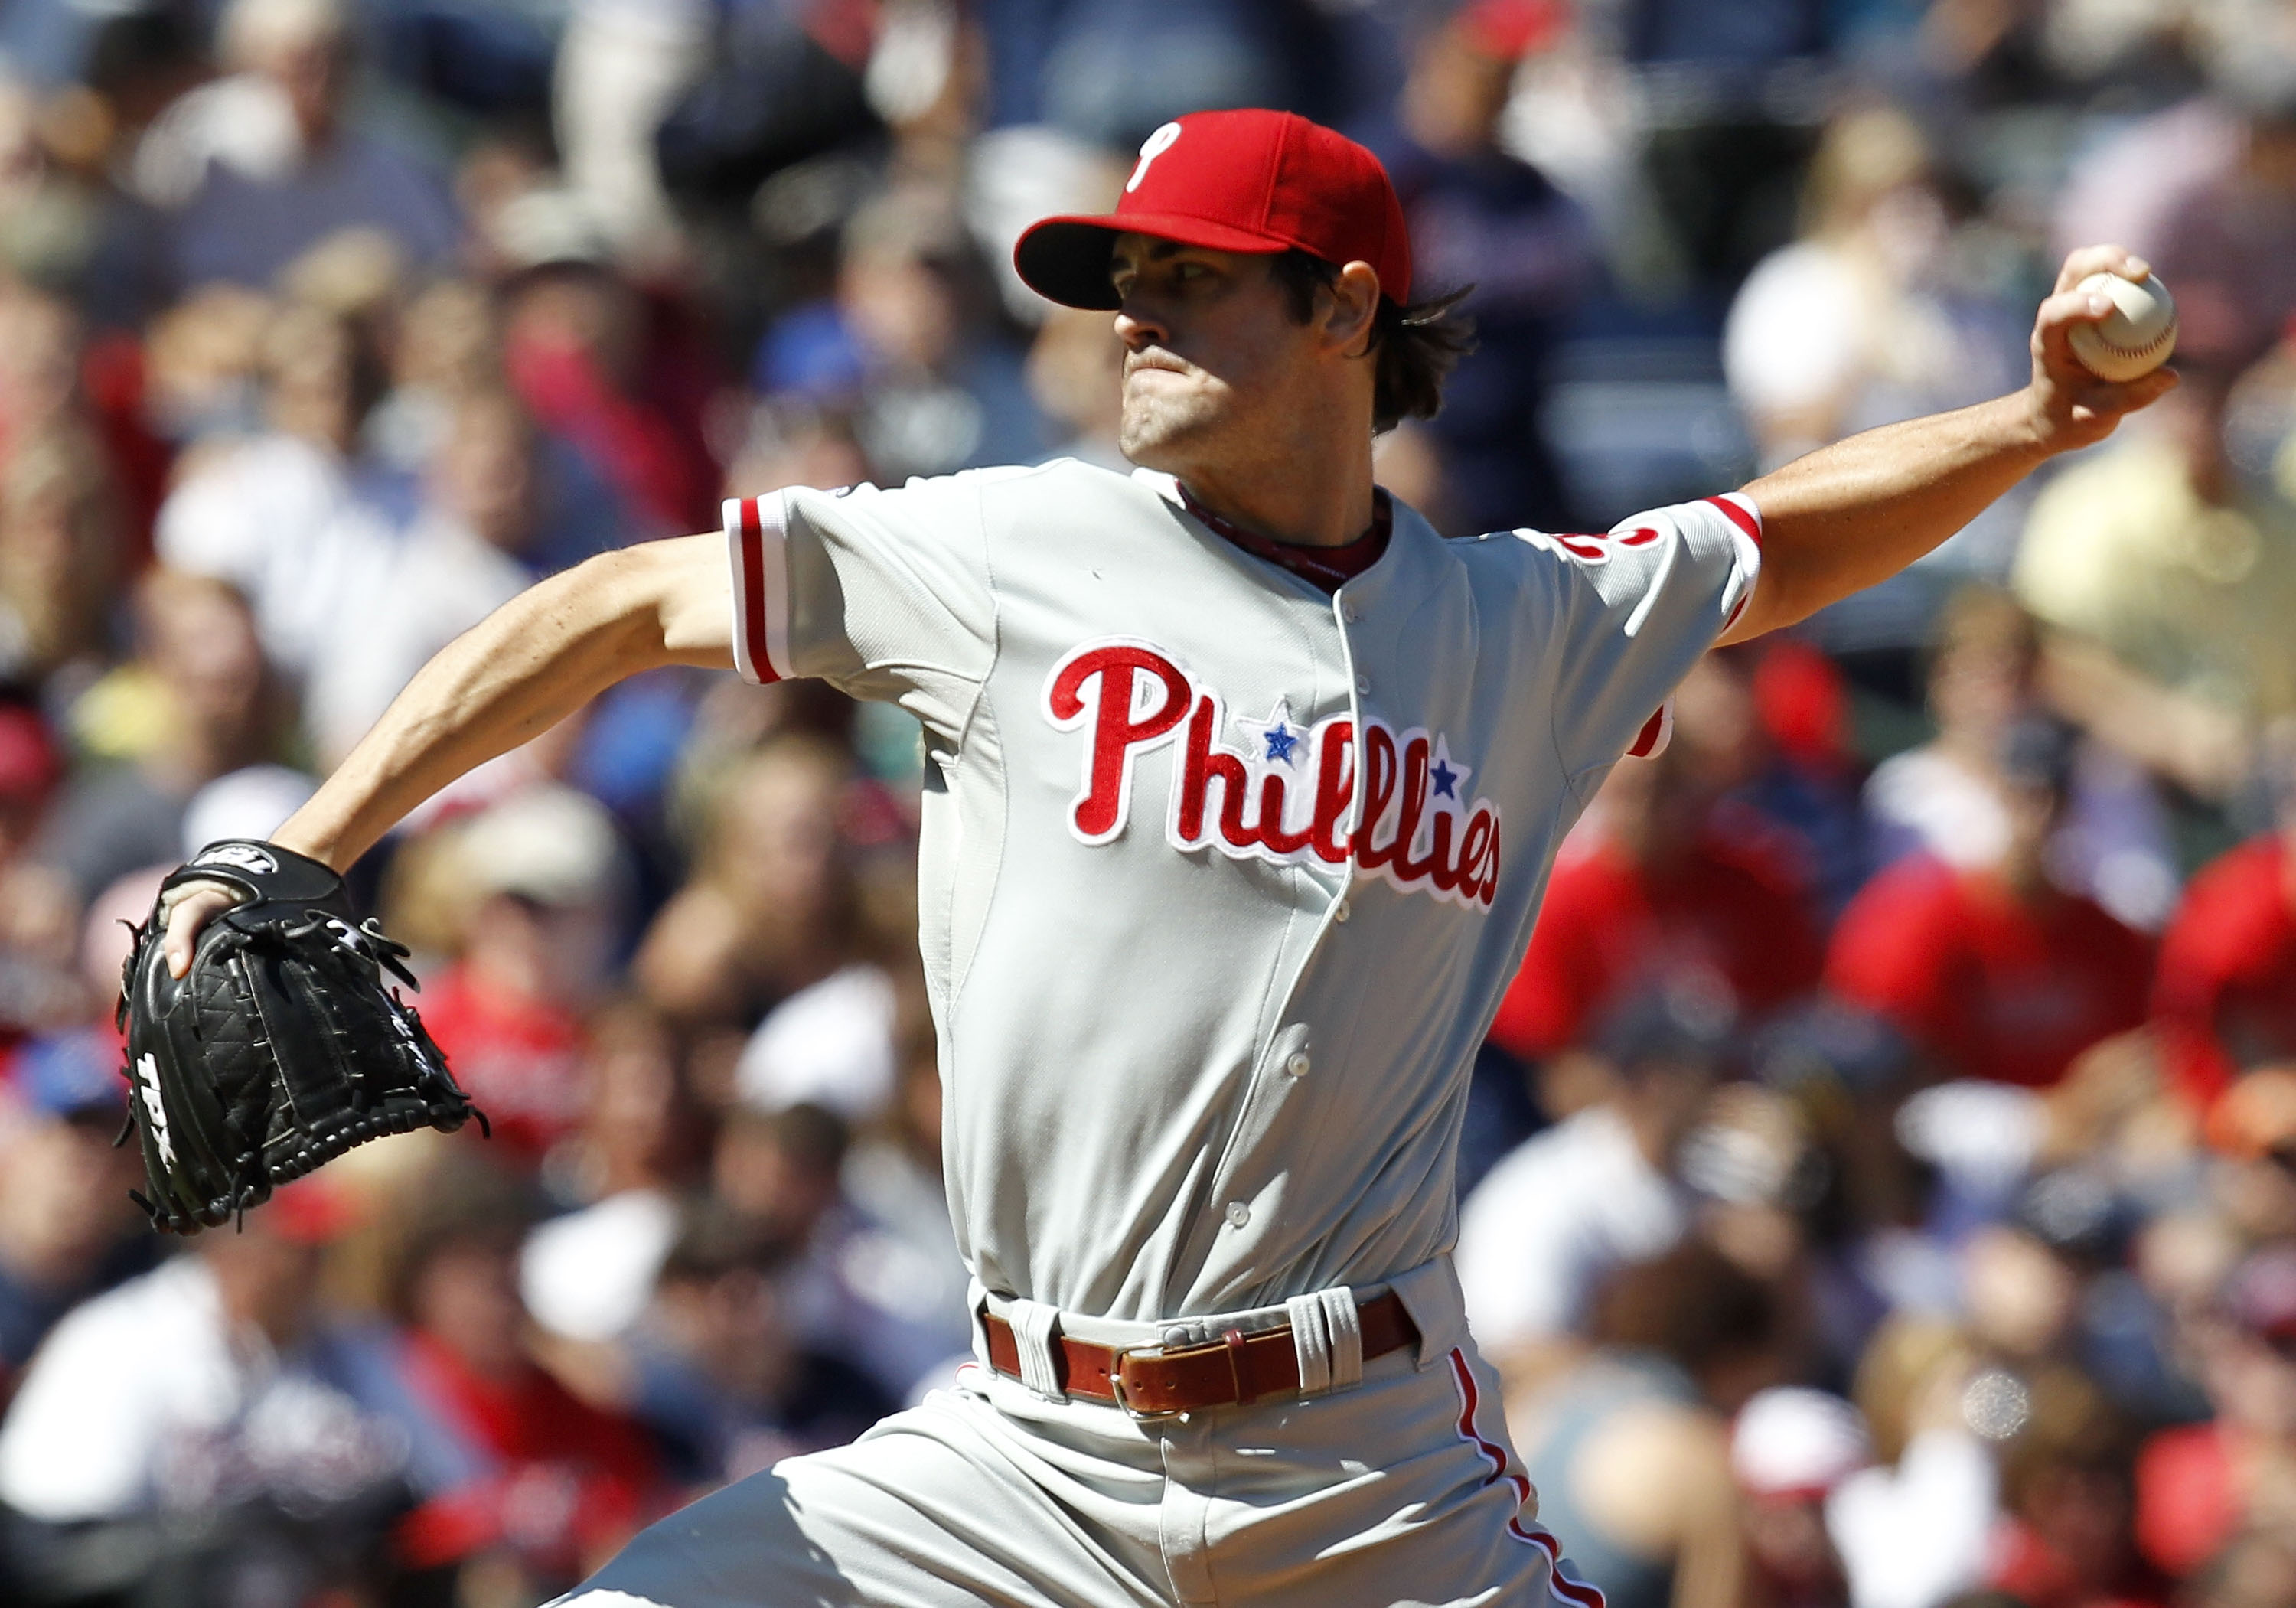 The Phillies shouldn't settle for a rational Cole Hamels trade